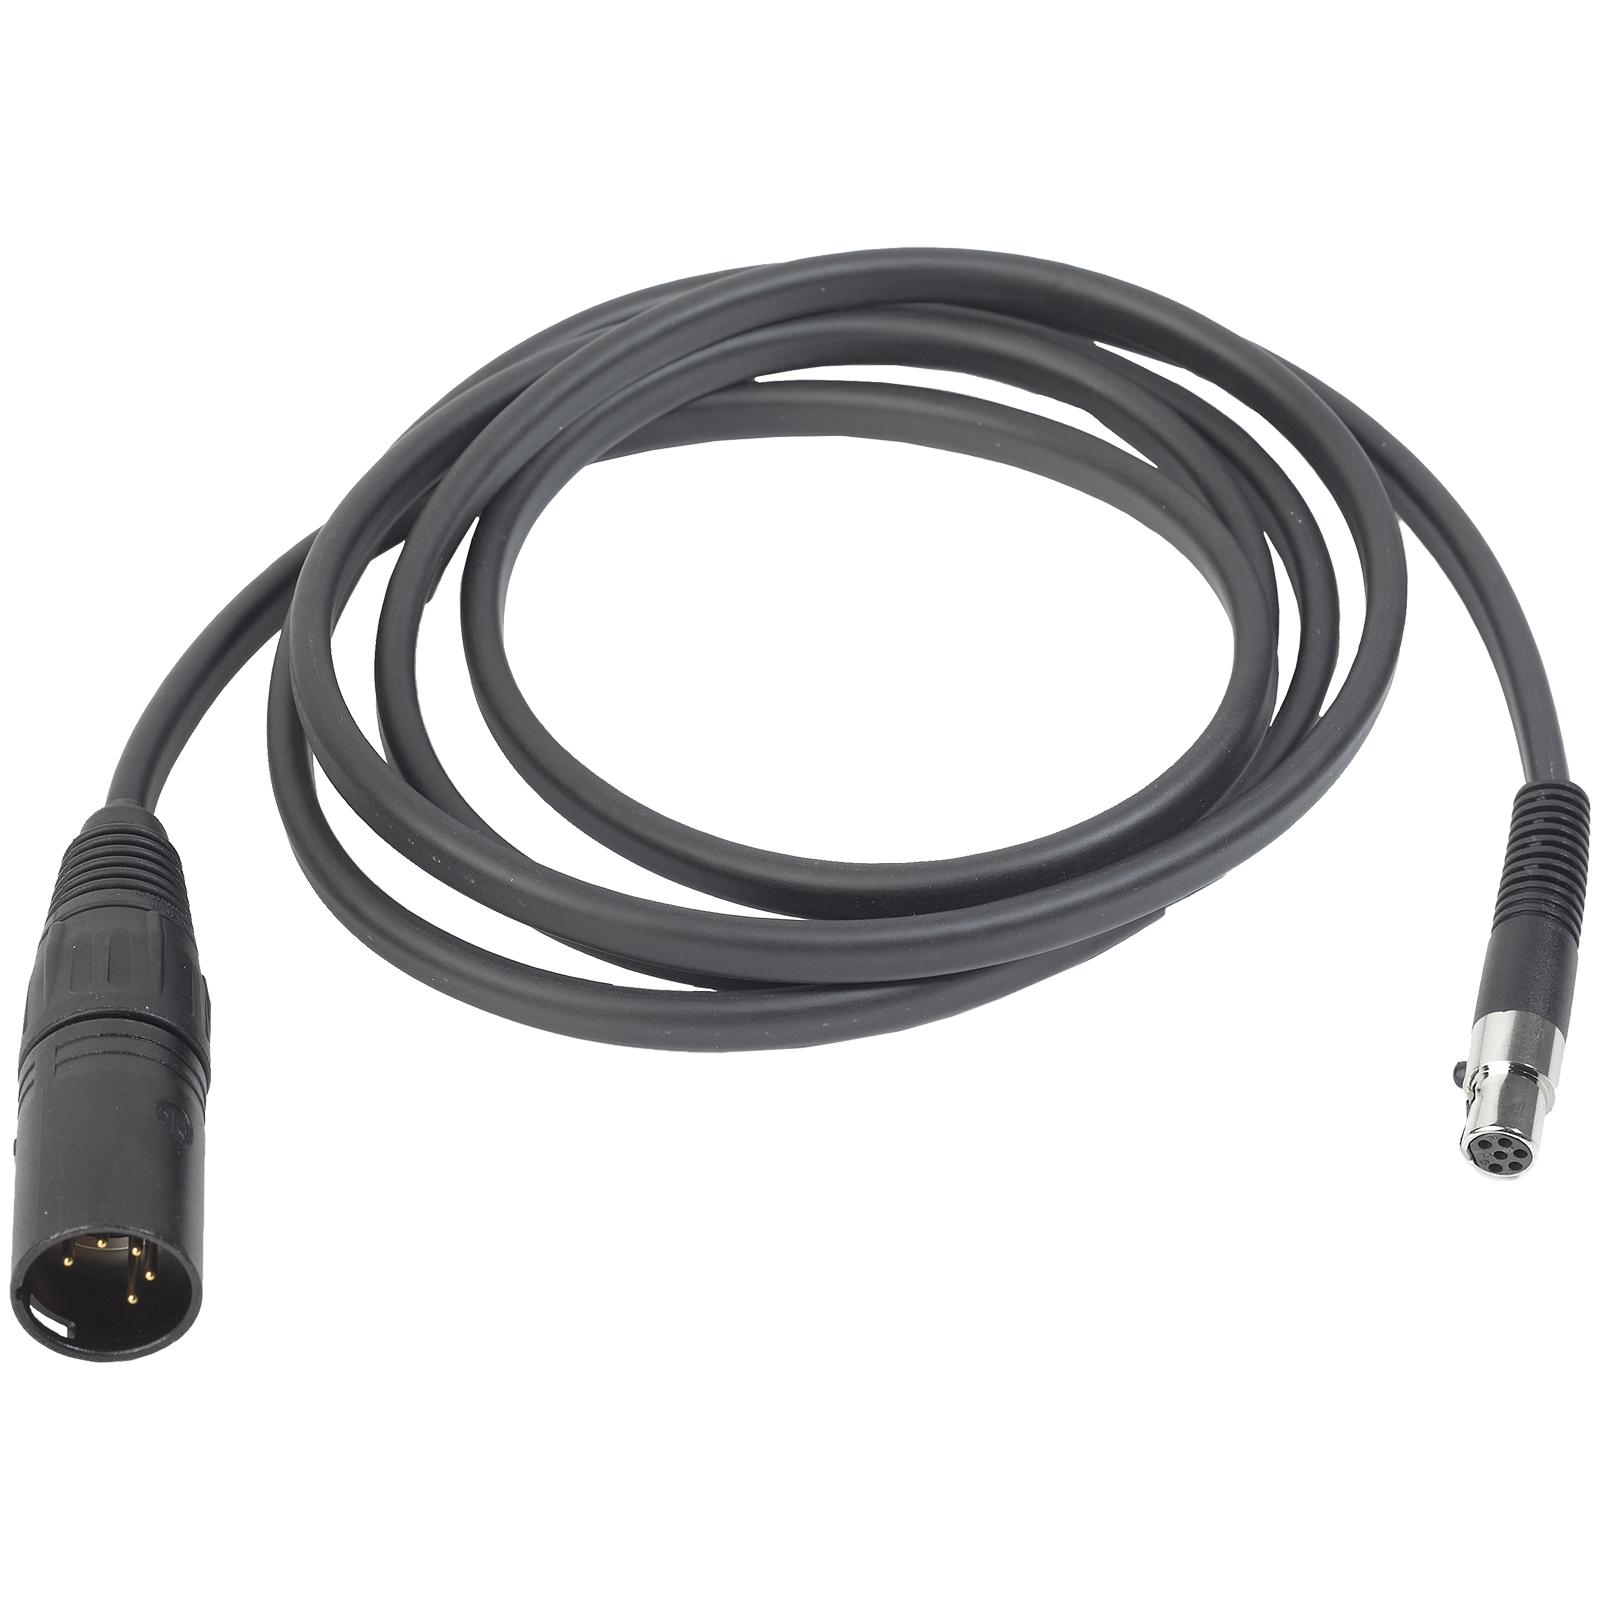 MK HS XLR 5D - Black - Detachable cable for AKG HSD headsets with 5pin XLR connector (male) - Hero